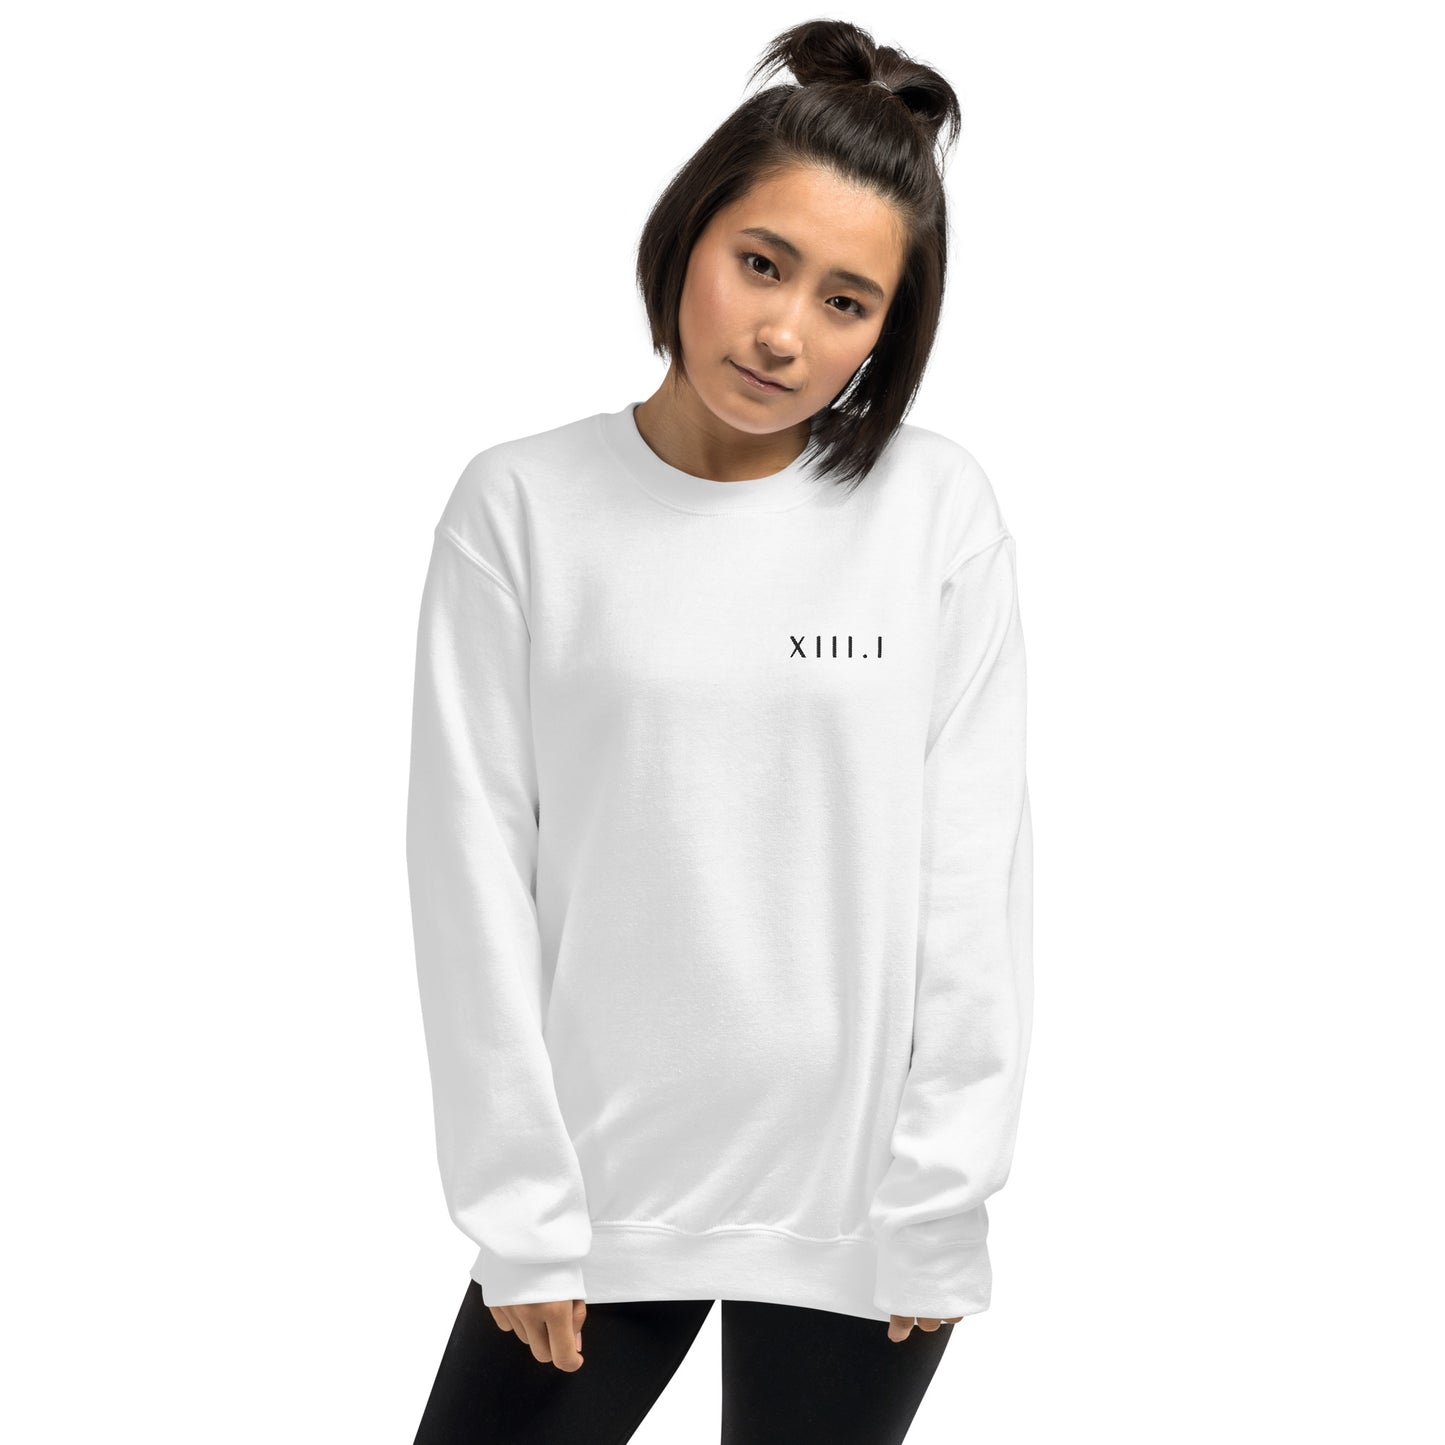 woman wearing a white unisex sweatshirt with XIII.I 13.1 half marathon in roman numerals embroidered in black writing